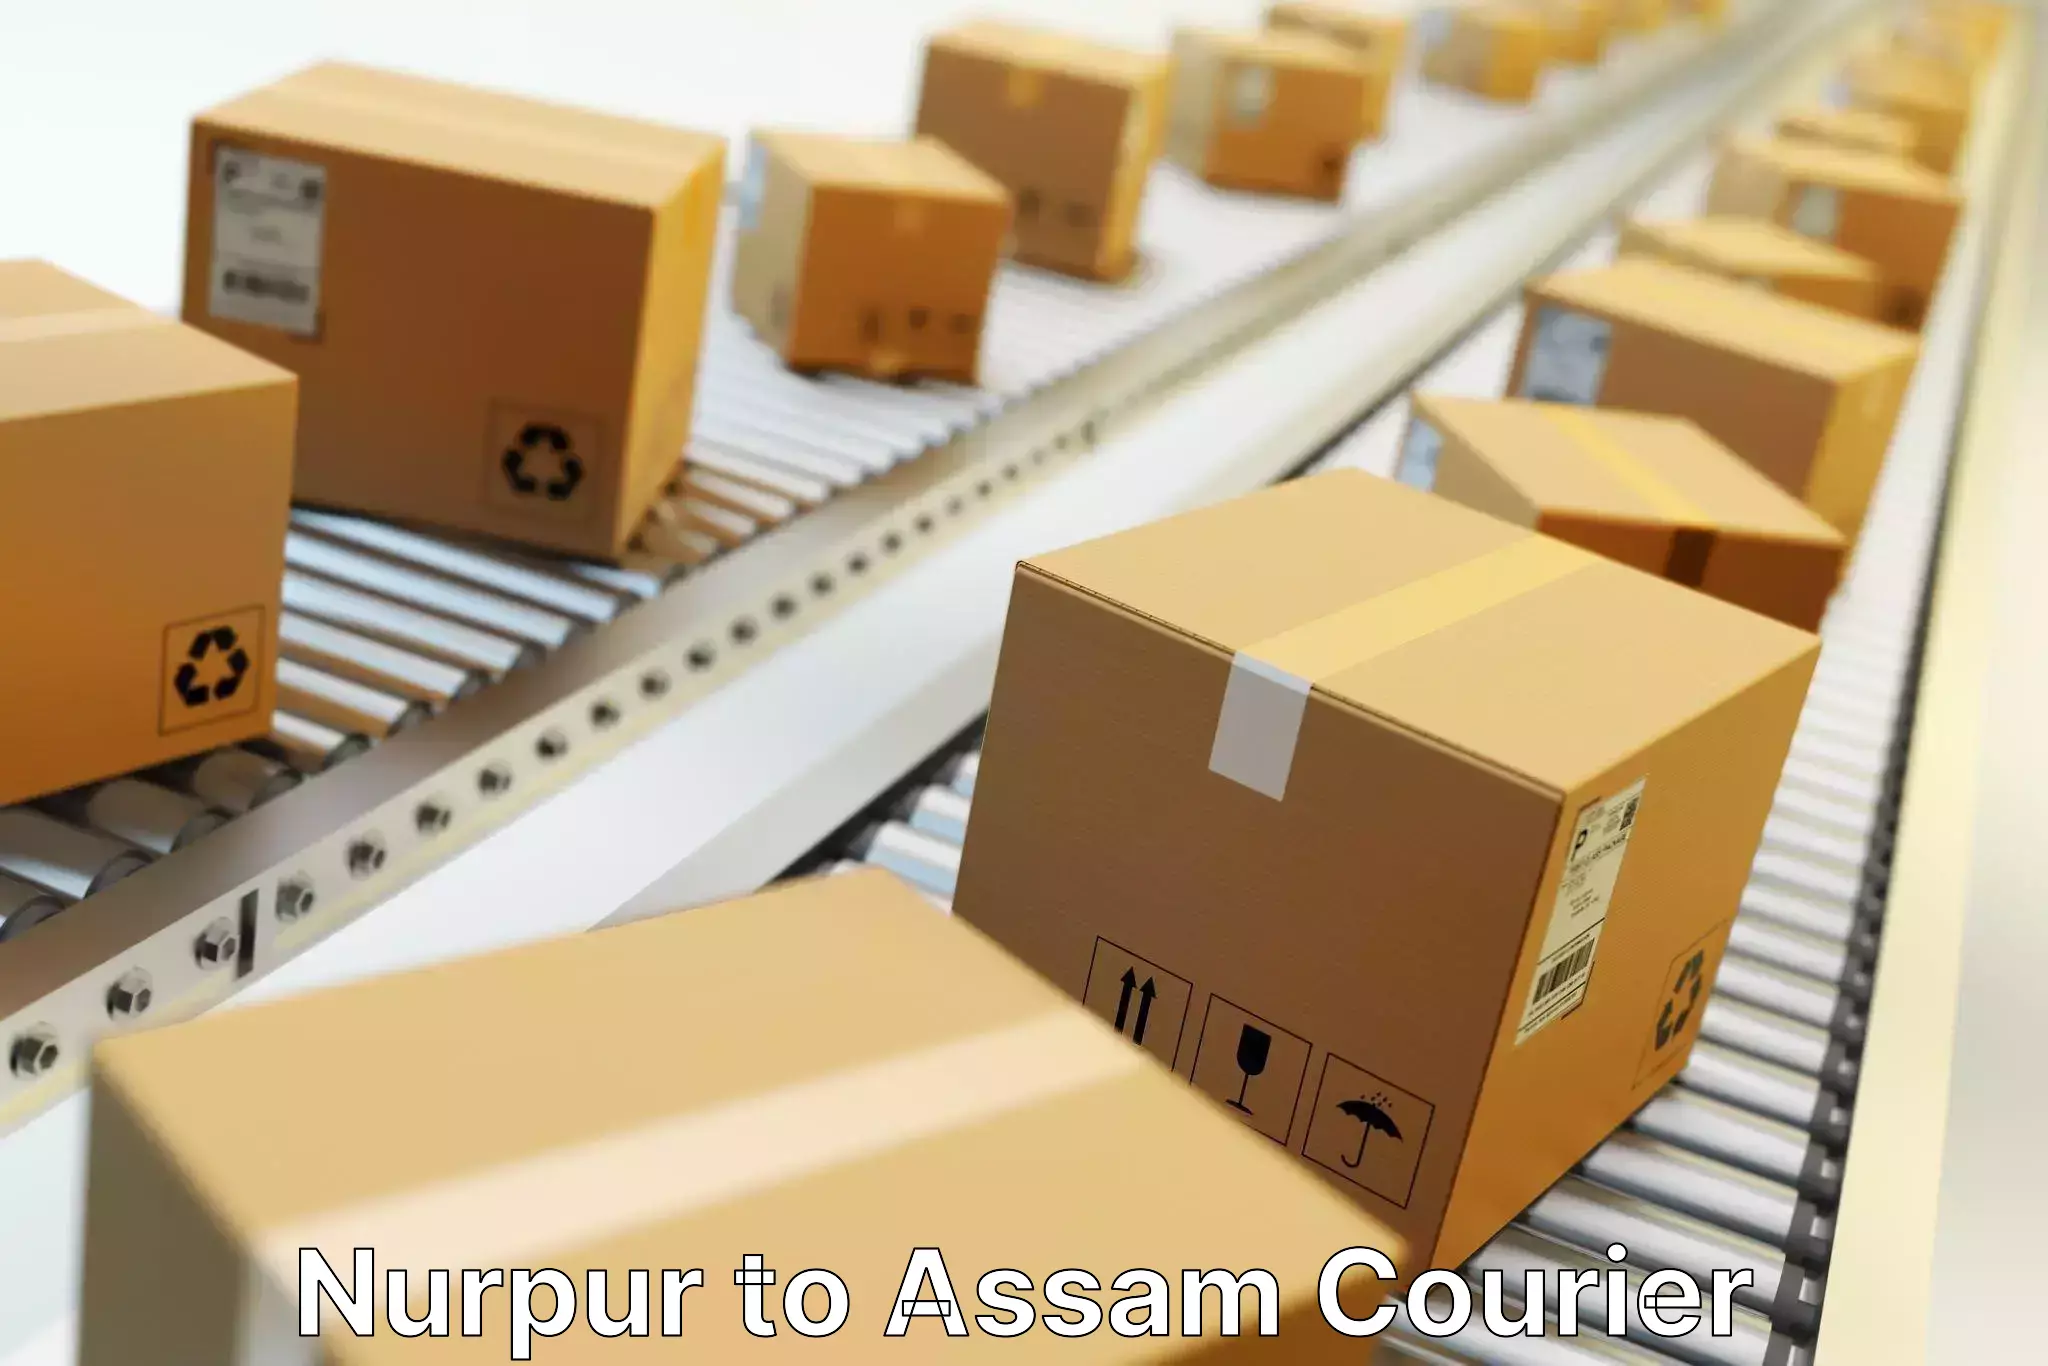 State-of-the-art courier technology Nurpur to Assam